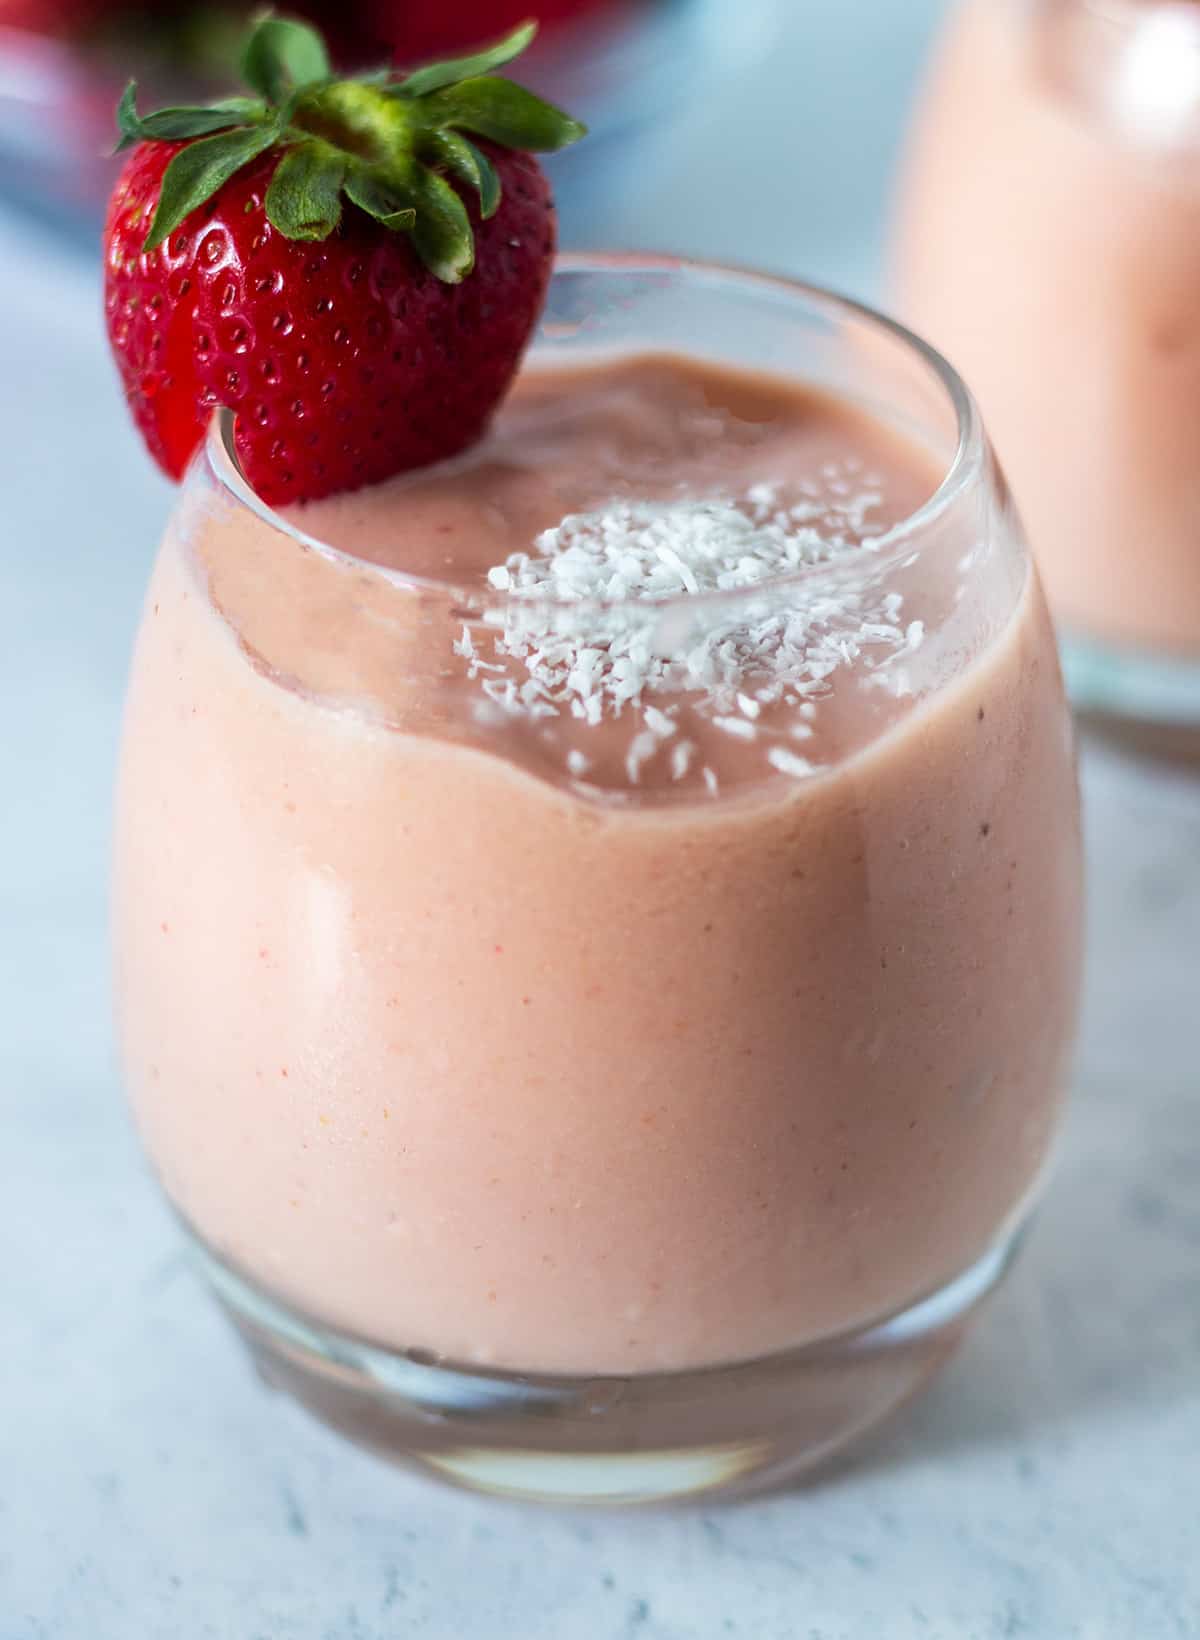 this tropical smoothie recipe in a clear glass garnished with shredded coconut and a strawberry on the side of the glass.